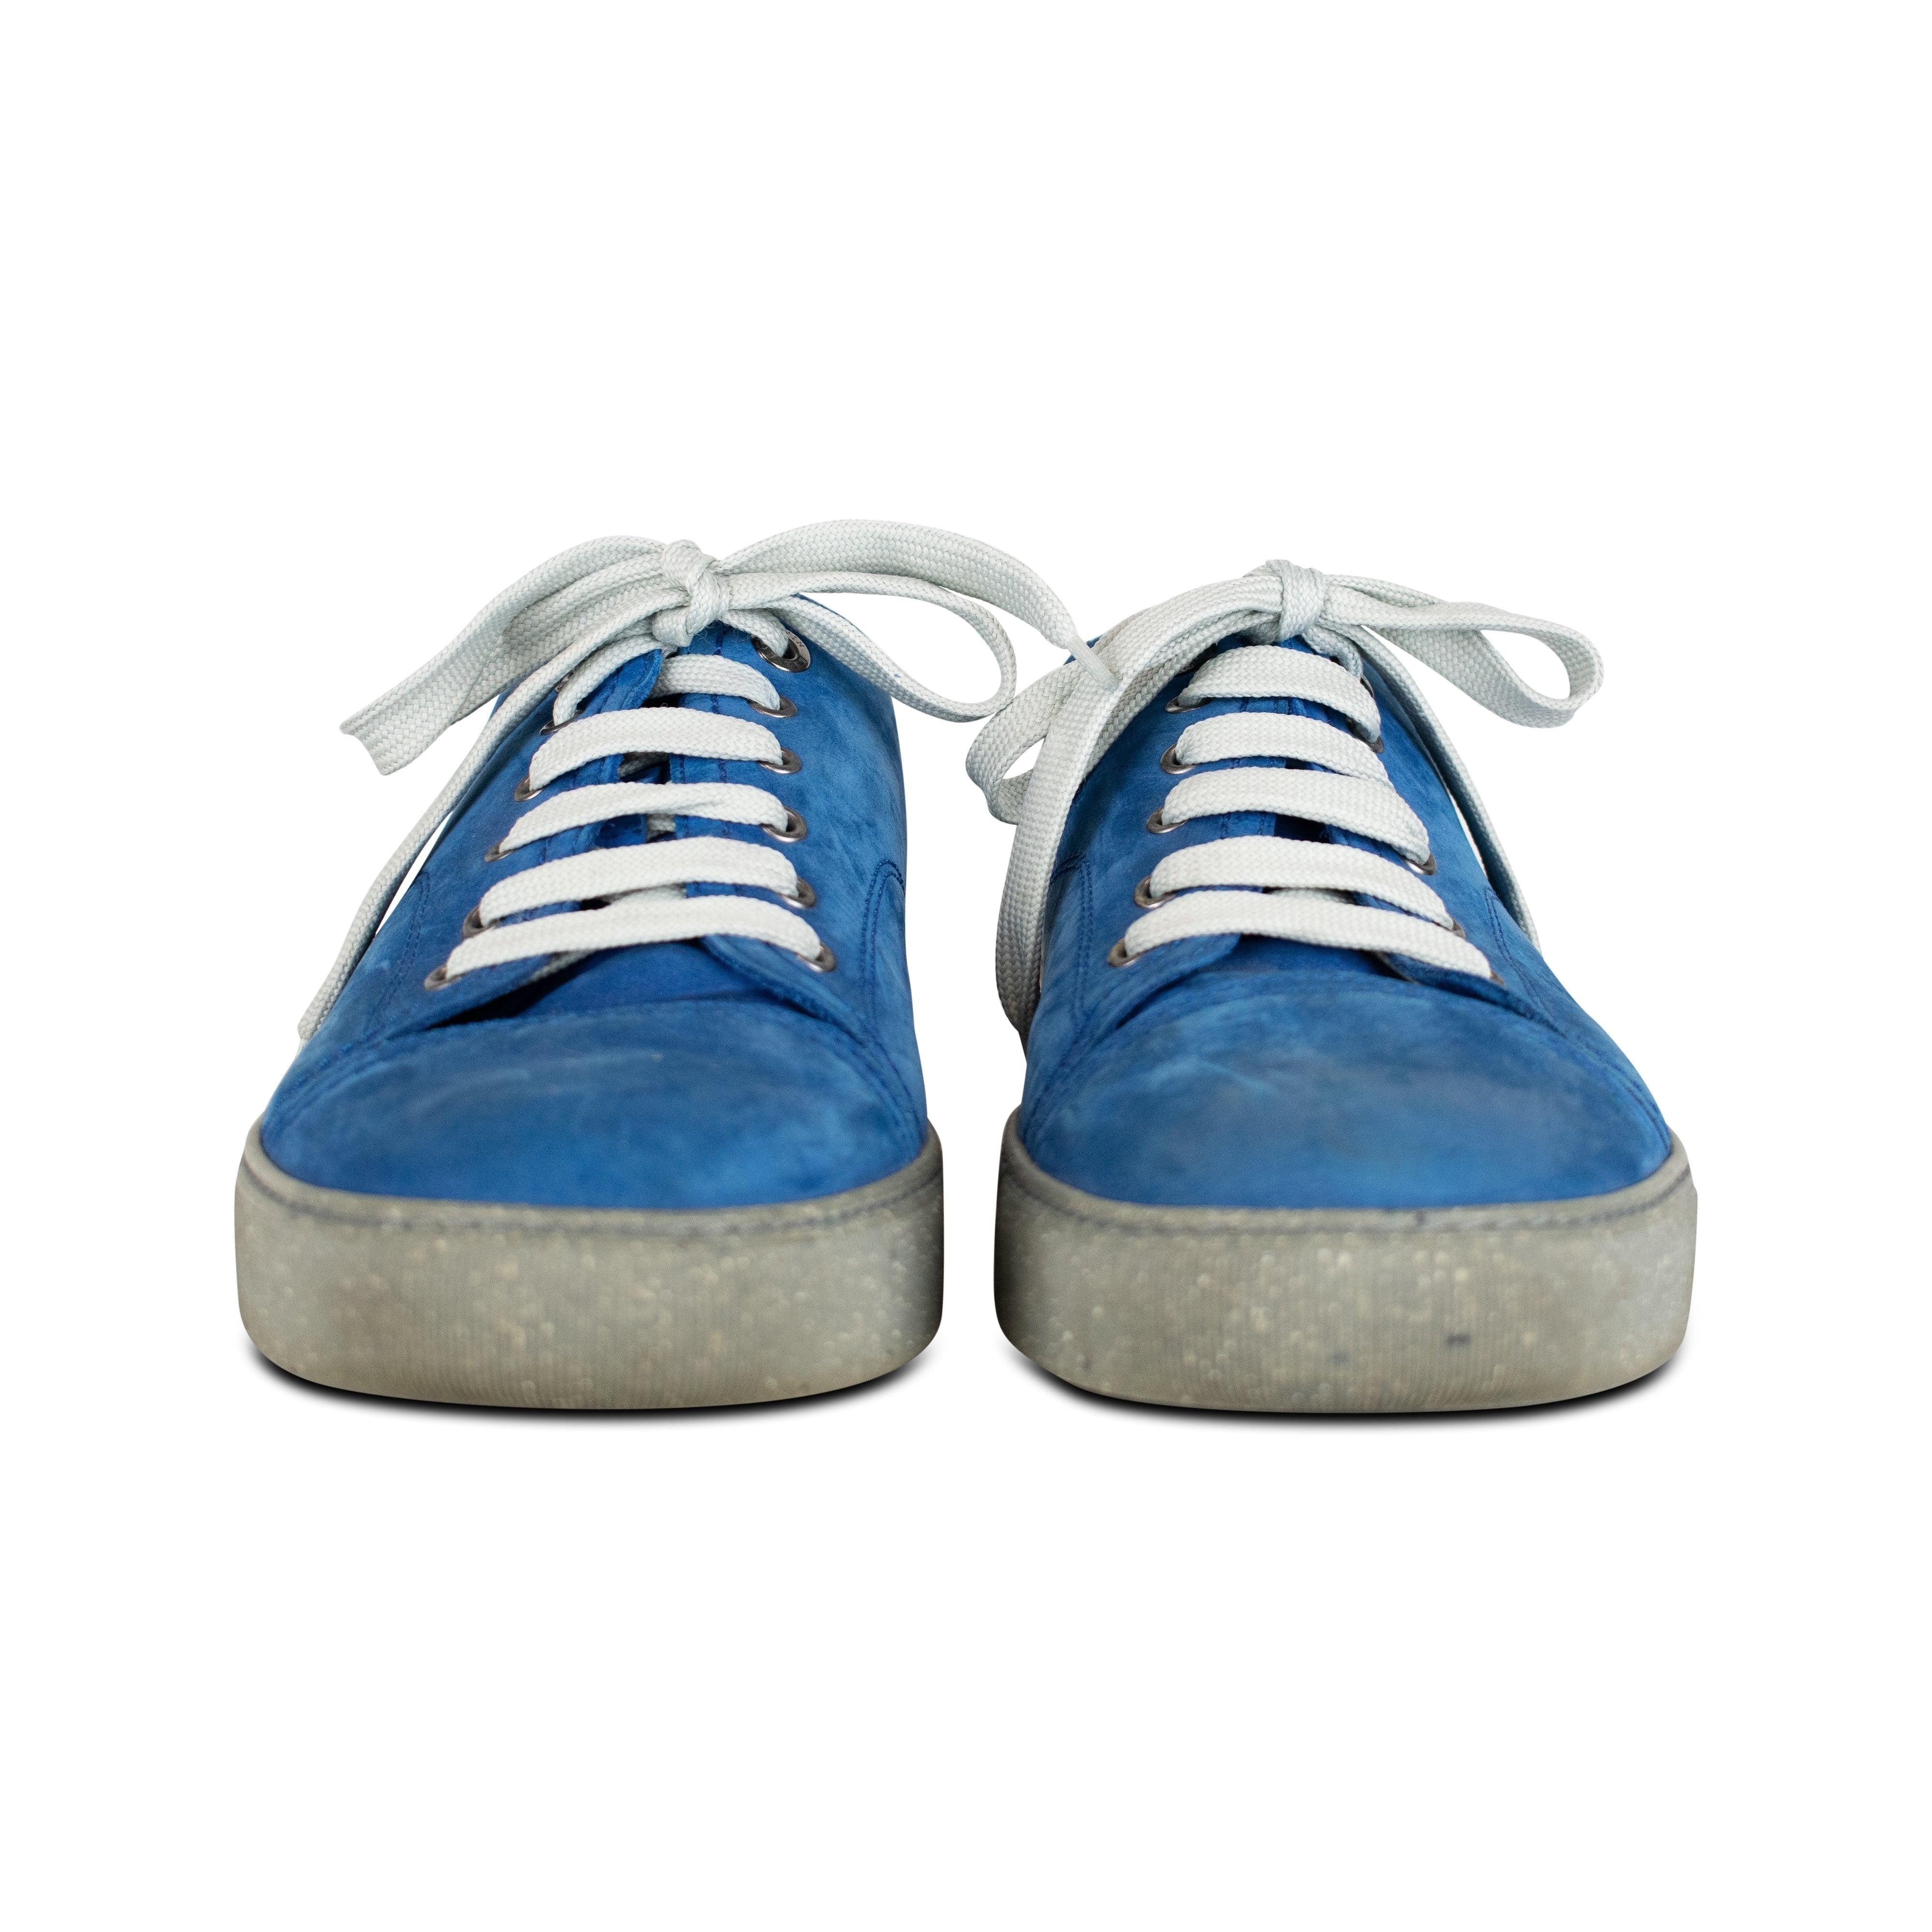 Lanvin Sneakers - Men's 9 - Fashionably Yours